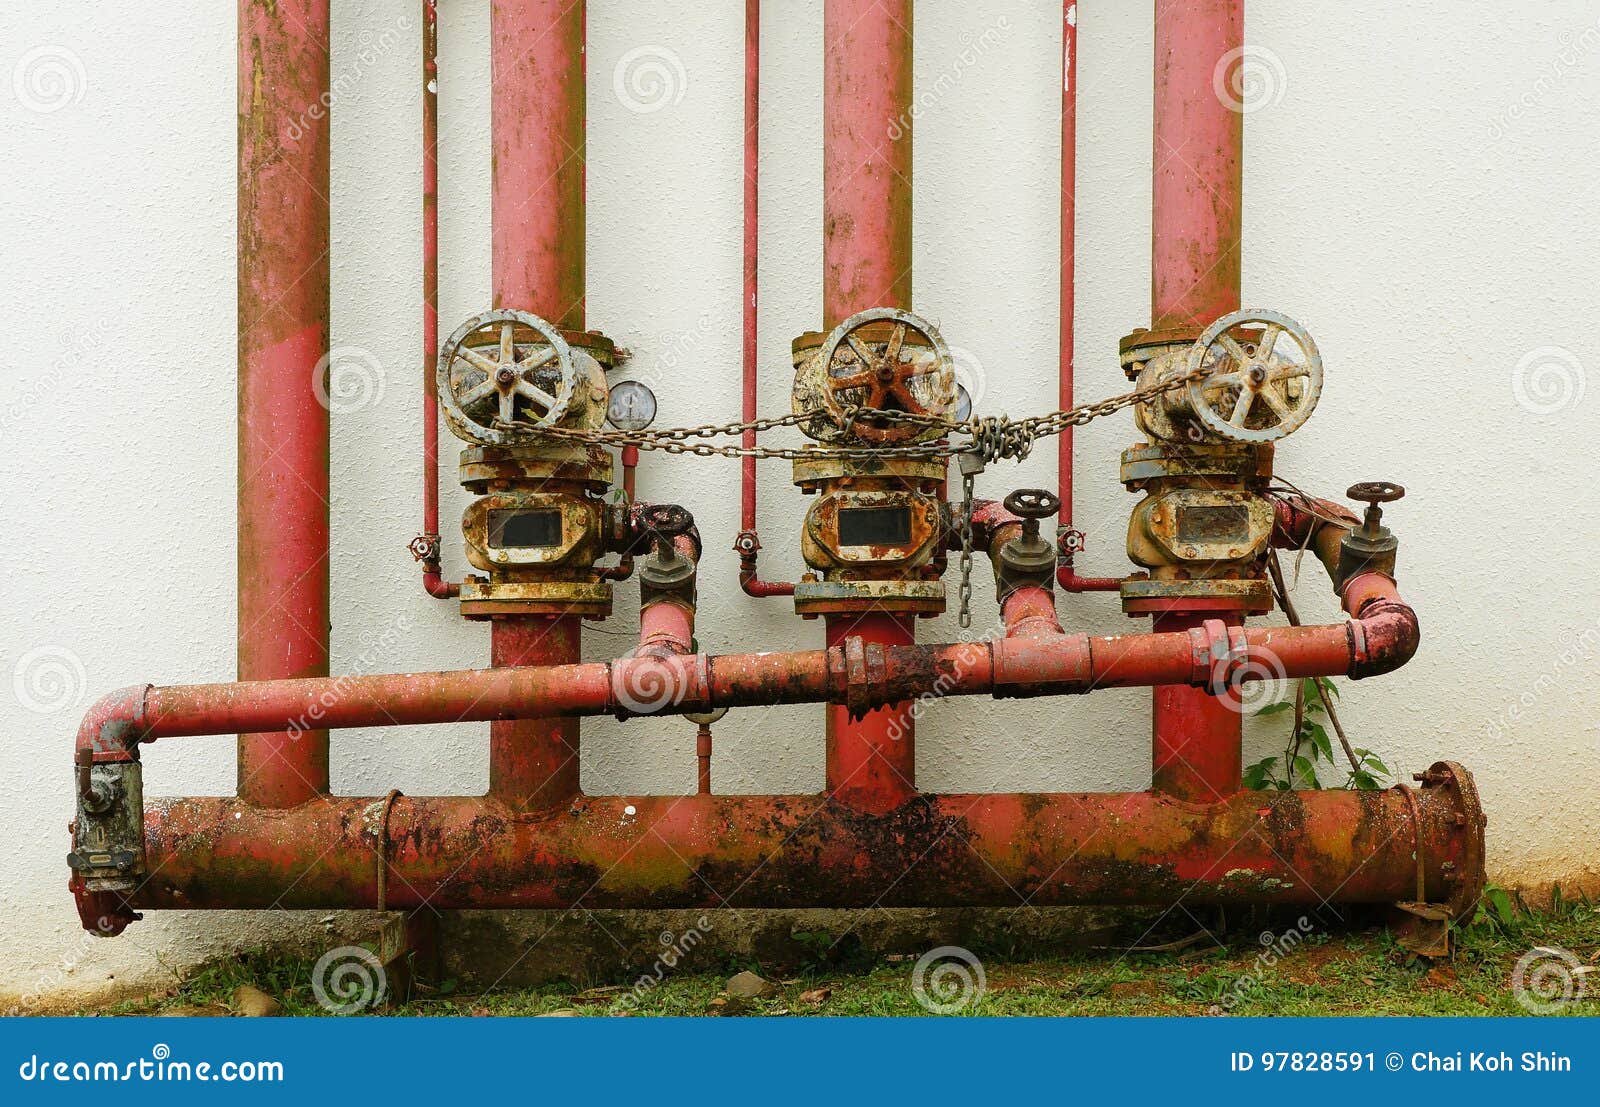 Rusty Fire Fighting Pipeline System Locked by Metal Chain Stock Image -  Image of industry